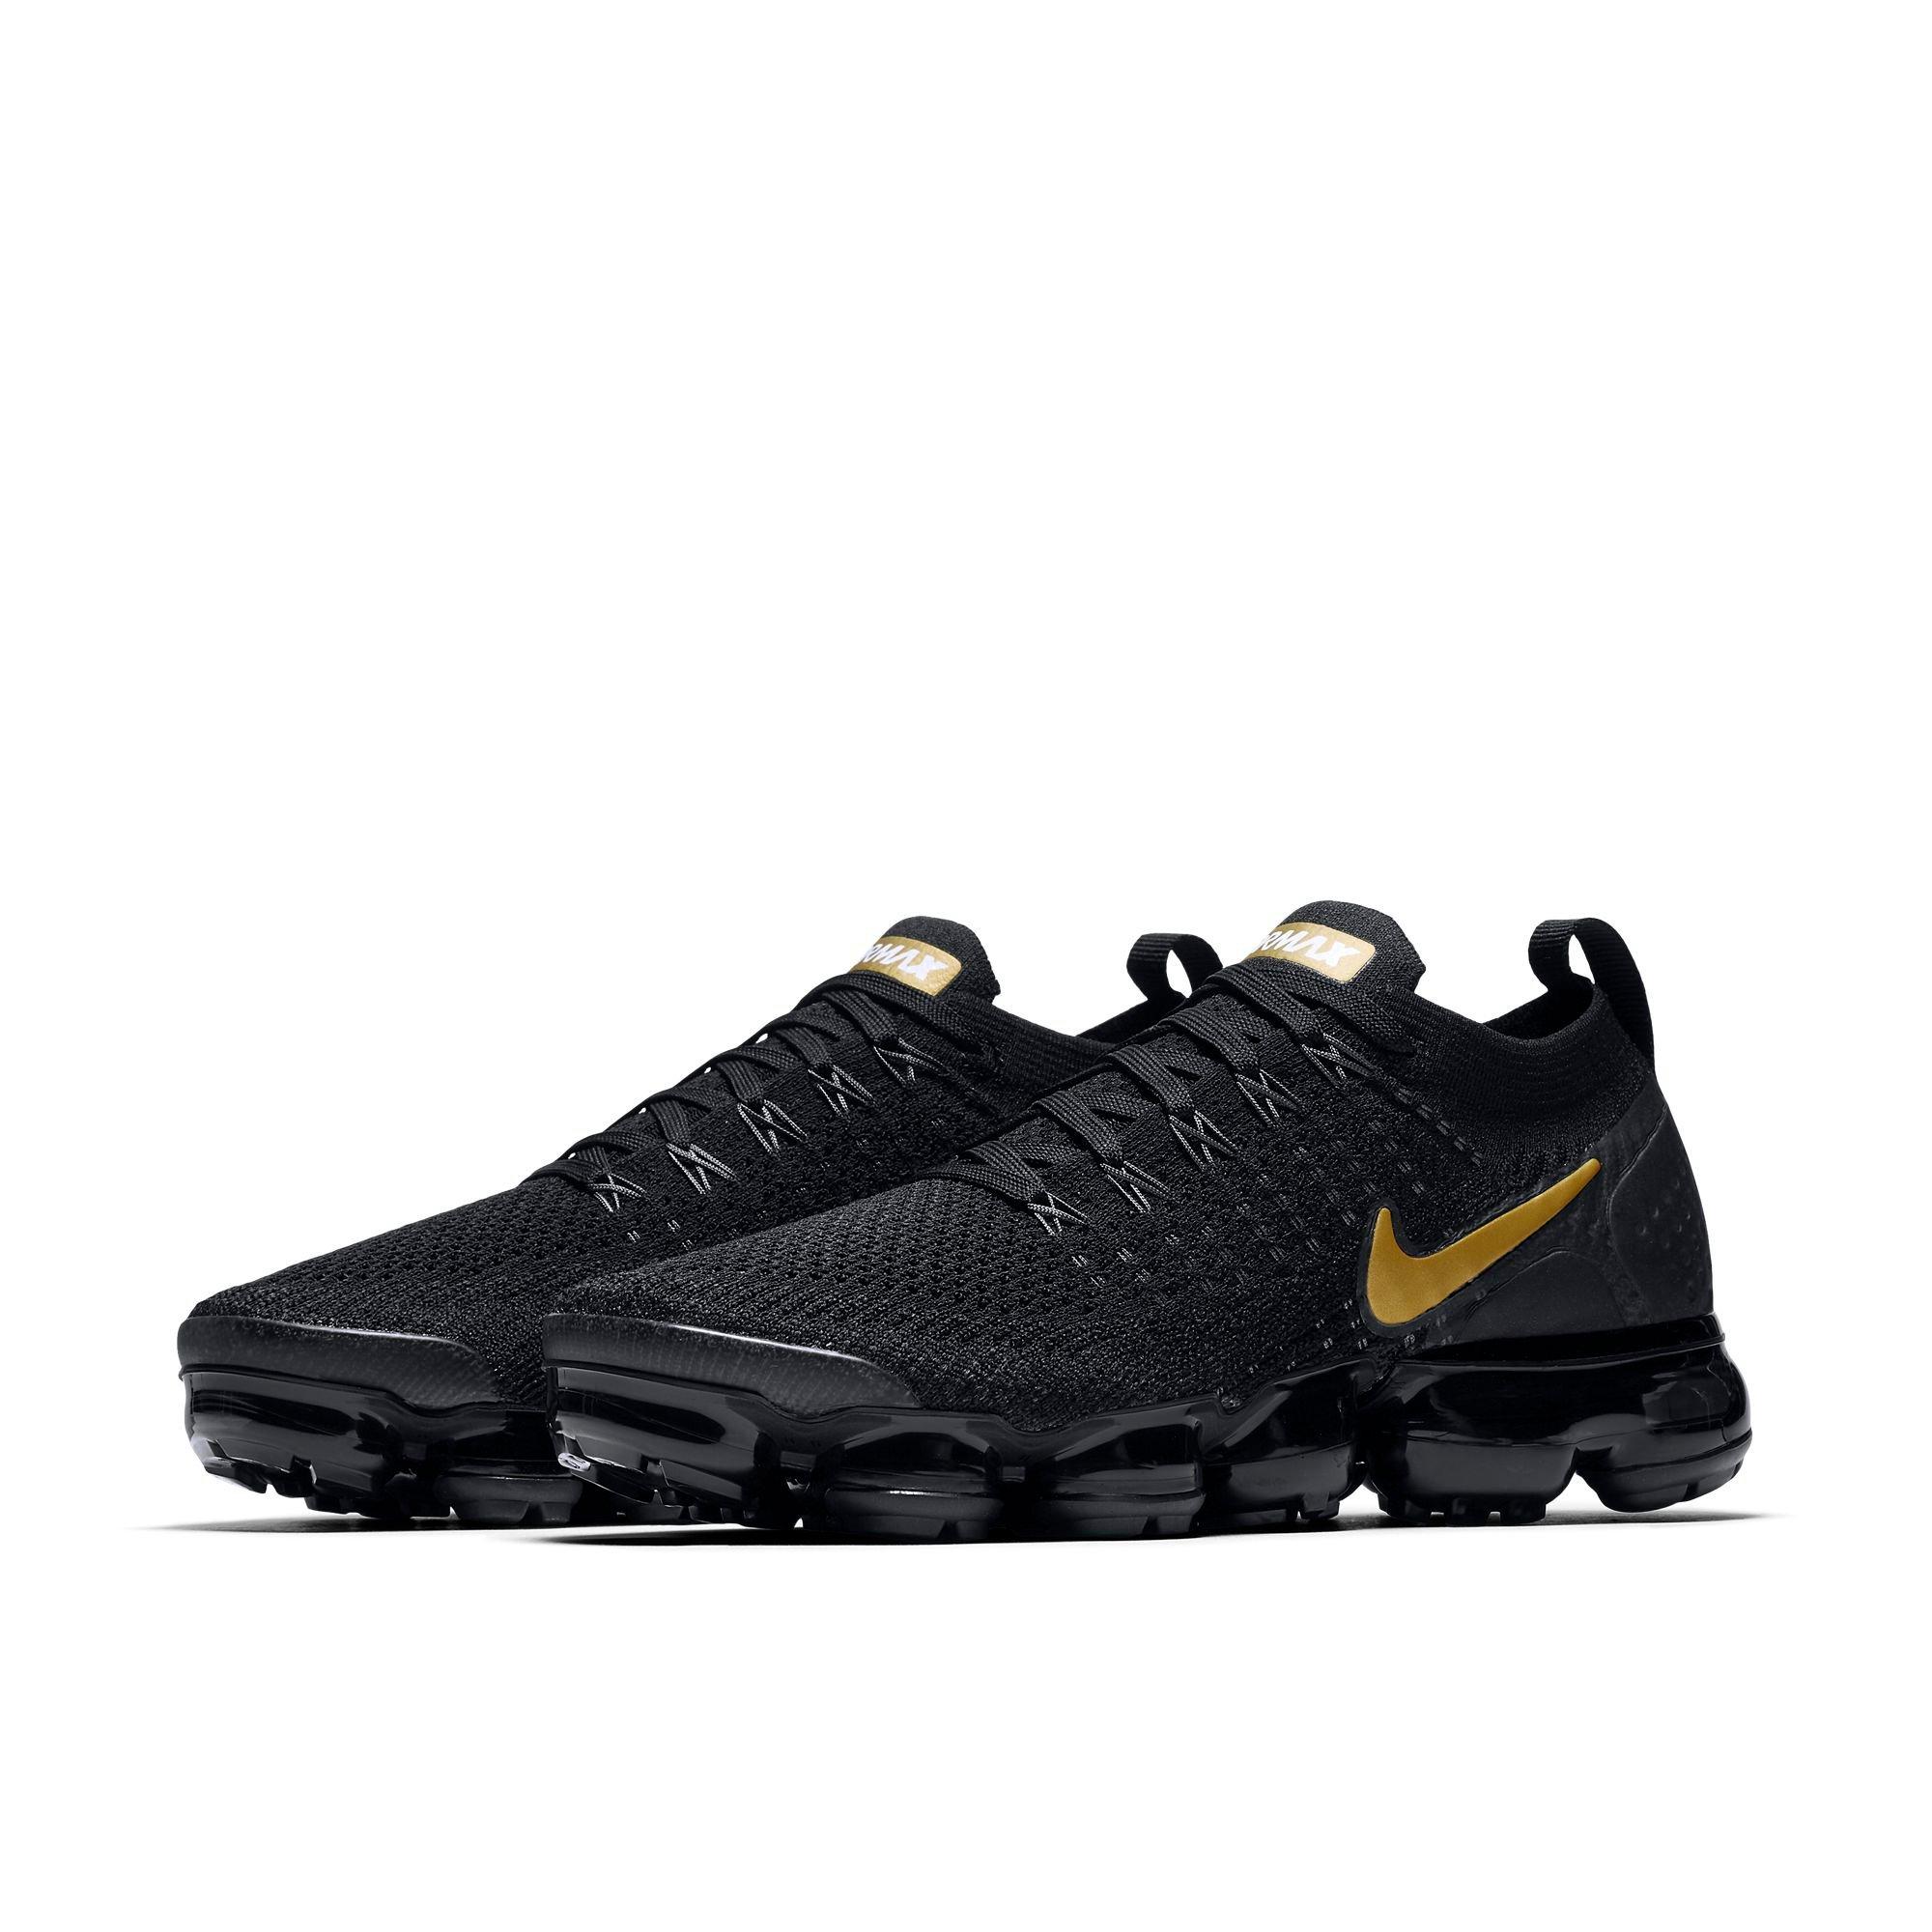 nike air vapormax flyknit 2 women's black and gold